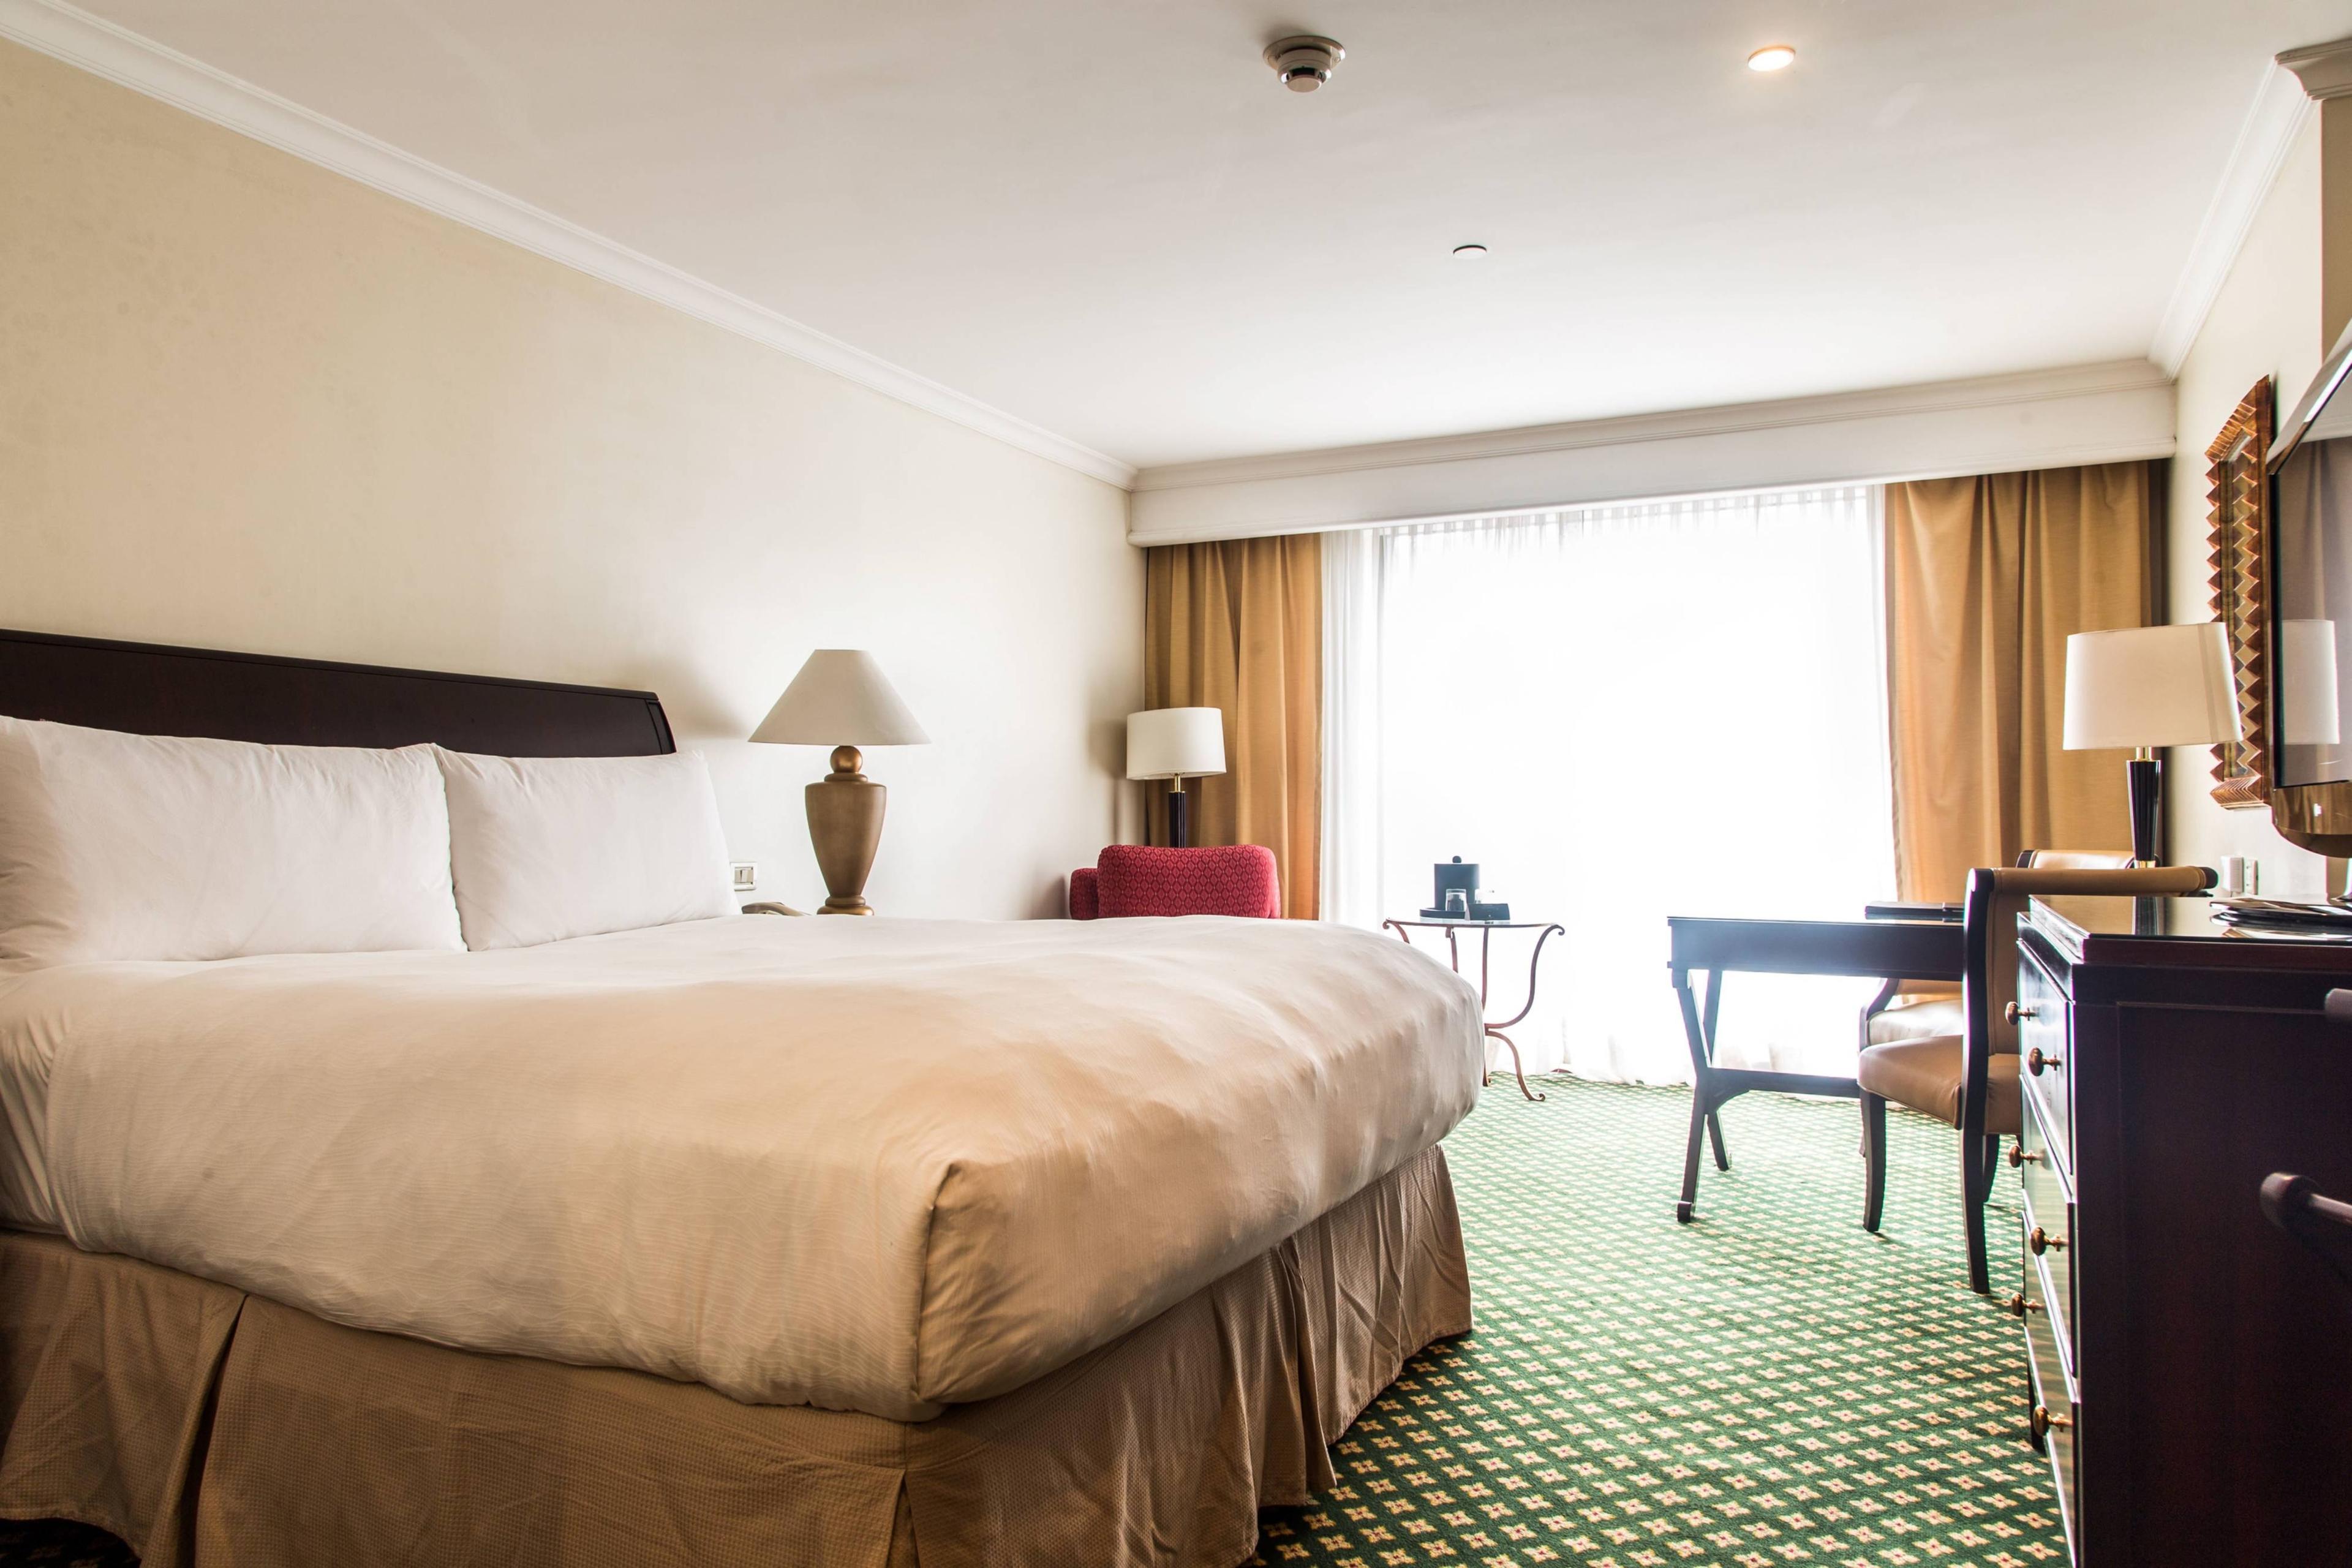 Our guest rooms feature elegant, dark wood furnishings in a comfortable setting, high-speed Internet access, luxury bedding, and a work desk with ambient natural daylight.